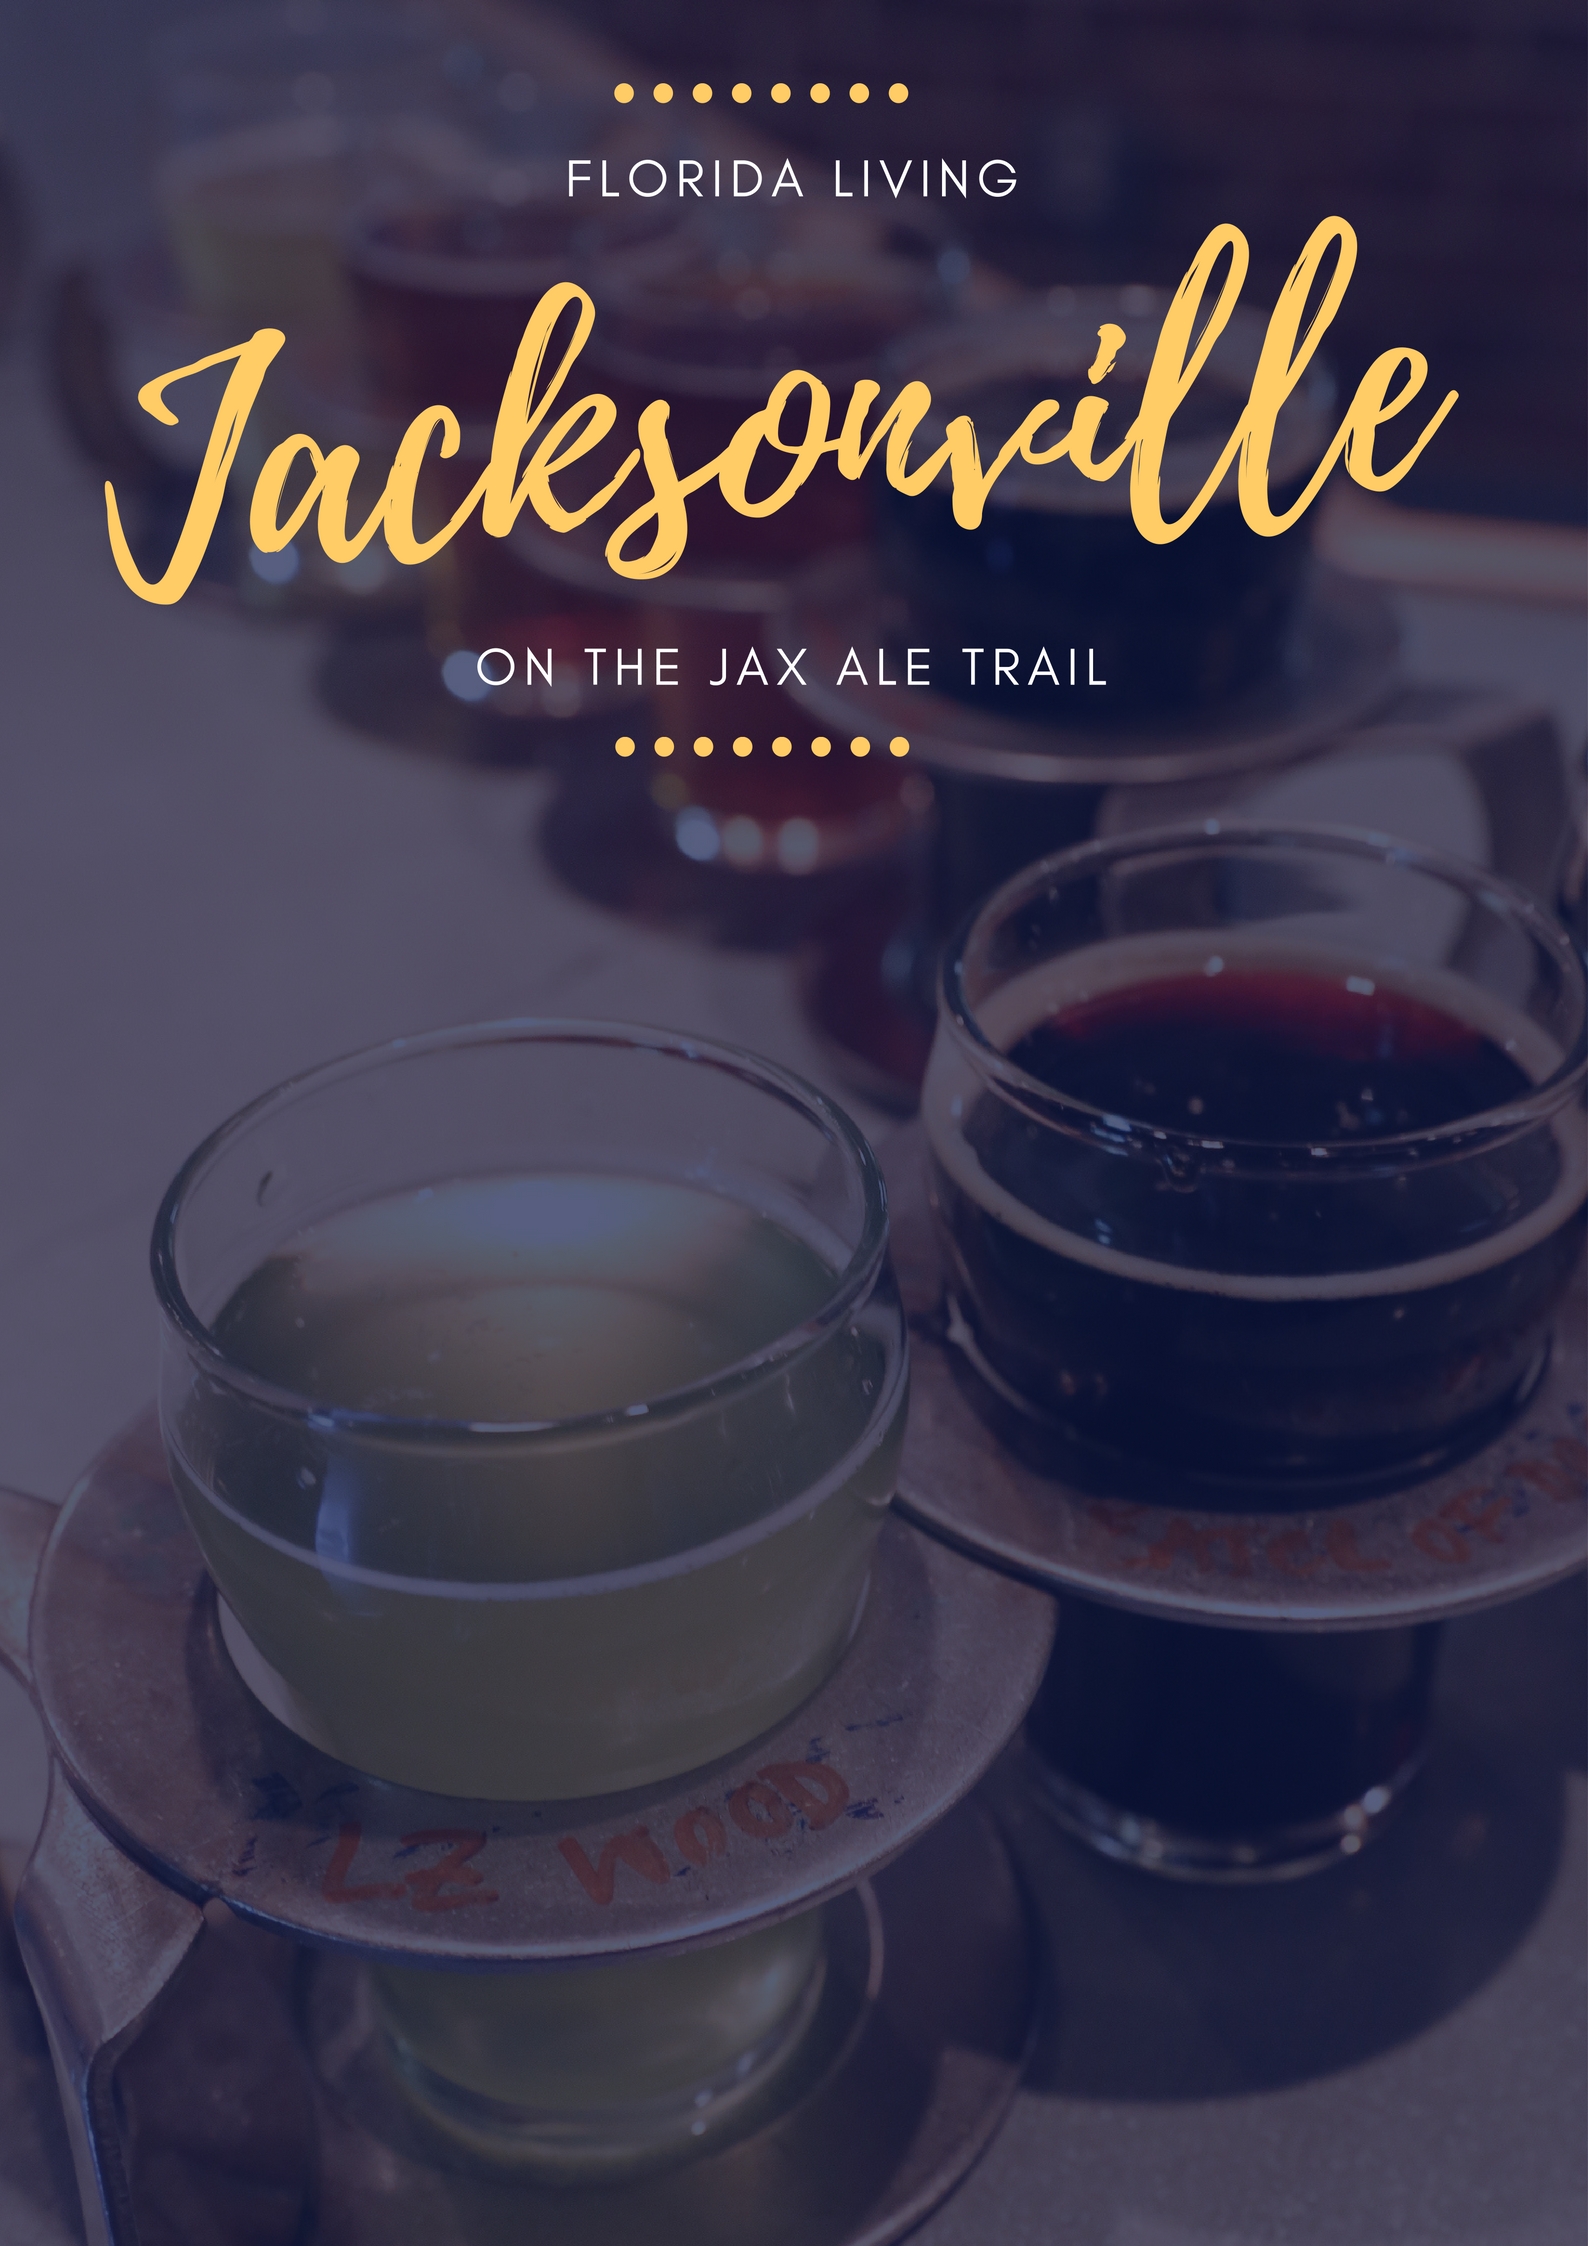 Planning a Vacation to Jacksonville, Florida